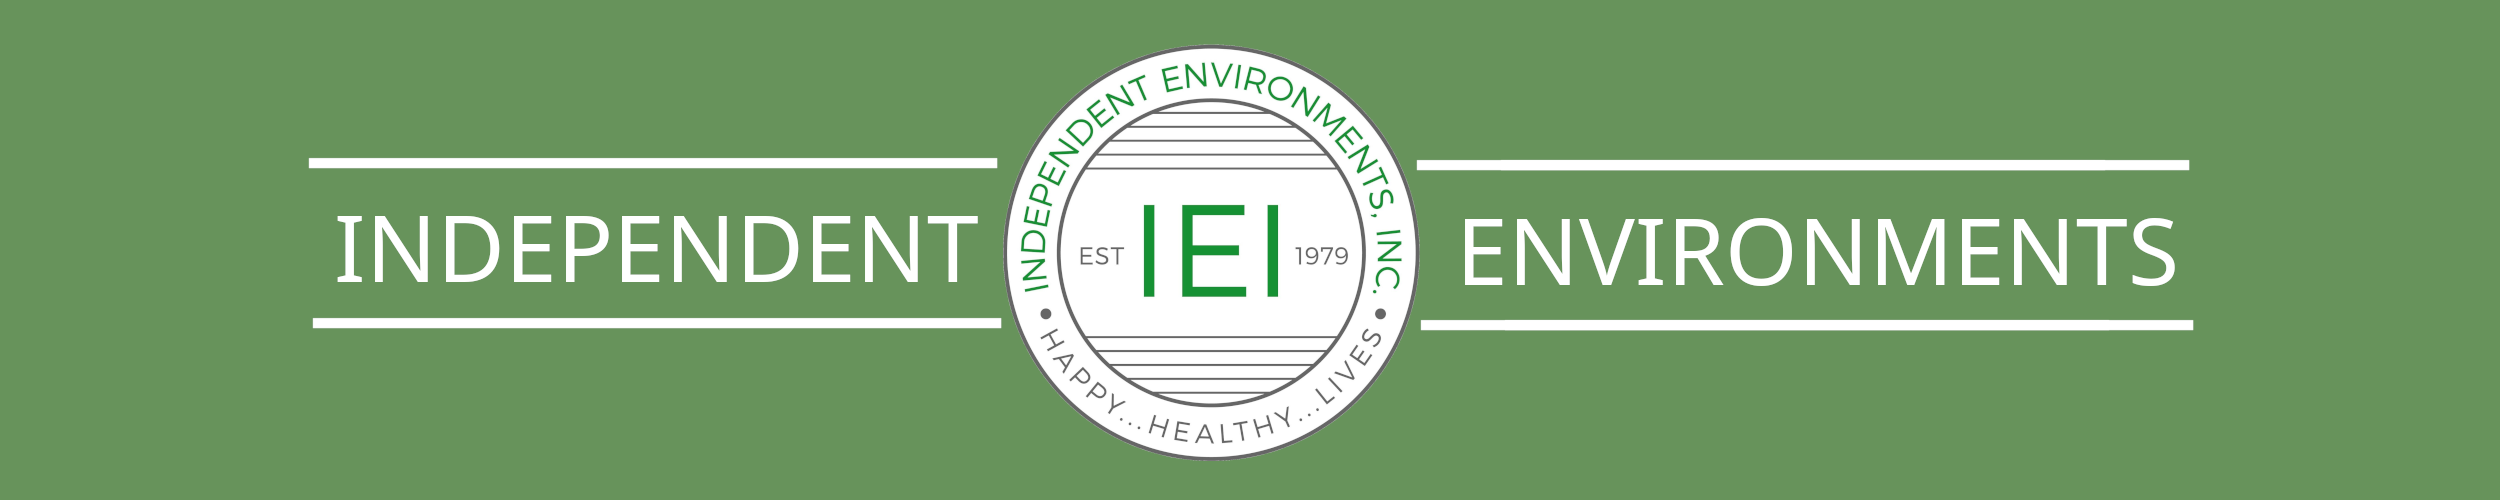 Independent Environments, Inc.